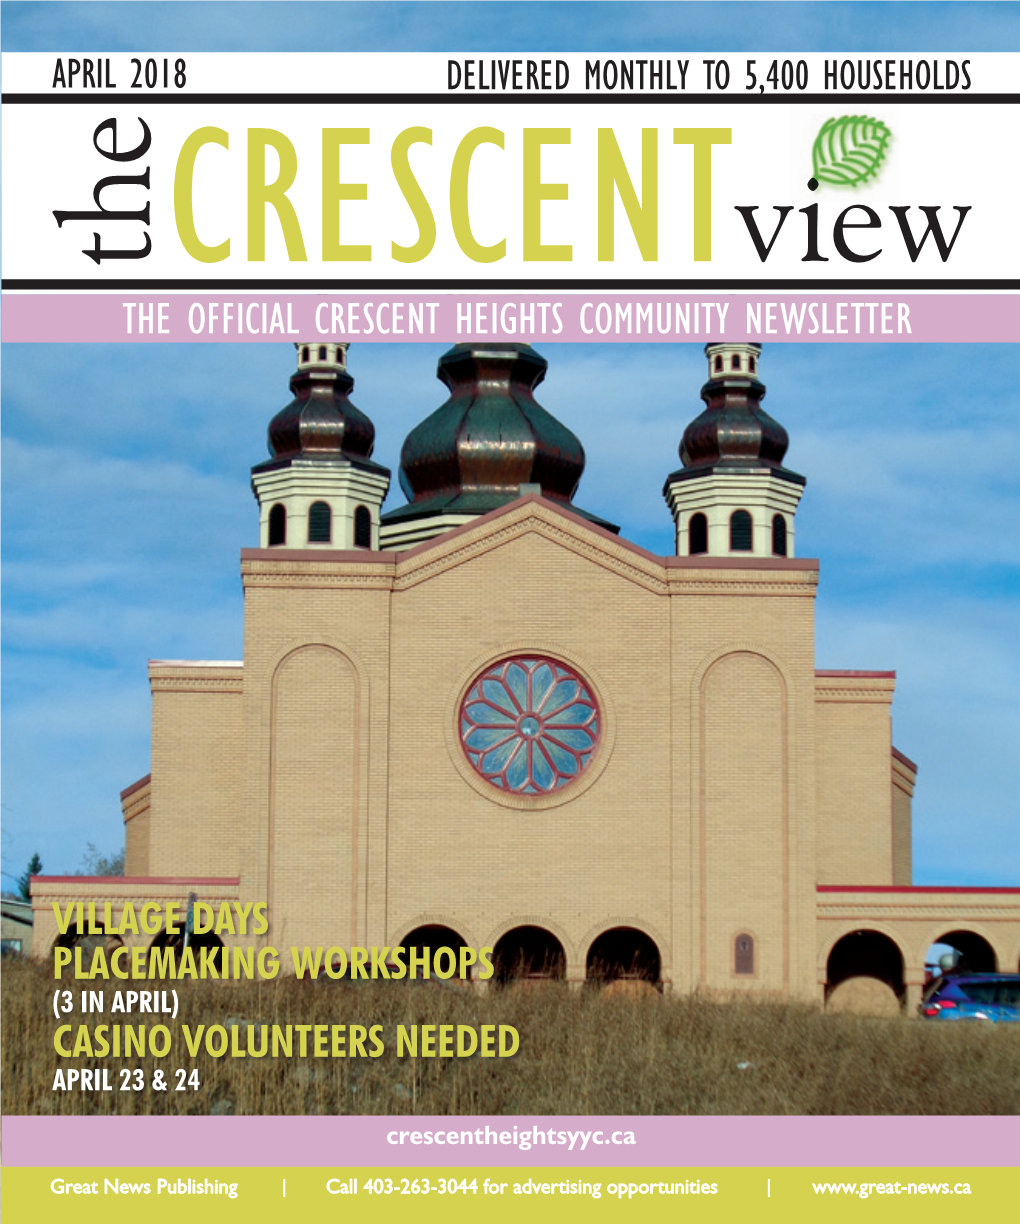 The Official Crescent Heights Community Newsletter